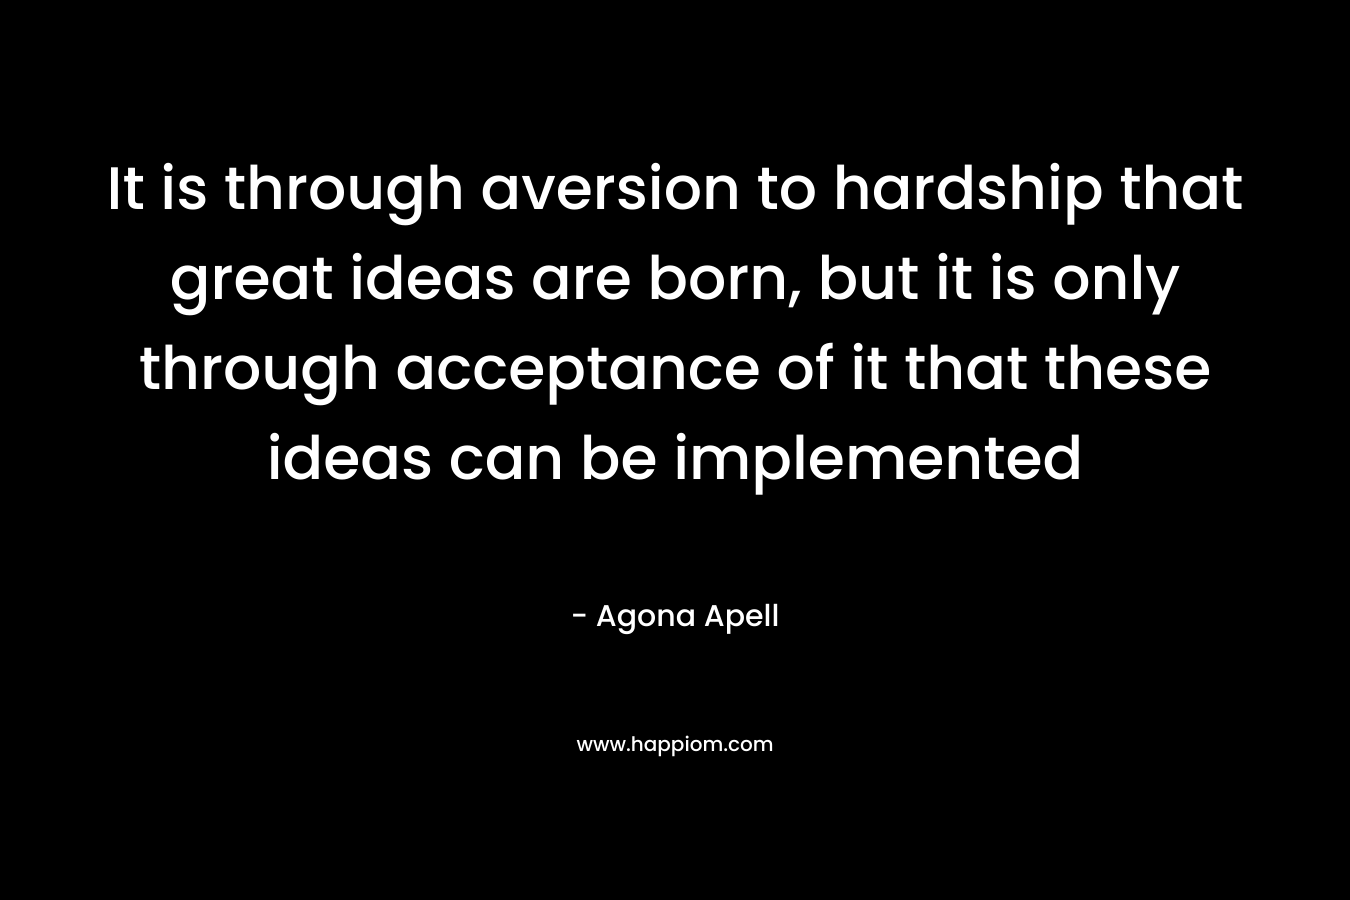 It is through aversion to hardship that great ideas are born, but it is only through acceptance of it that these ideas can be implemented